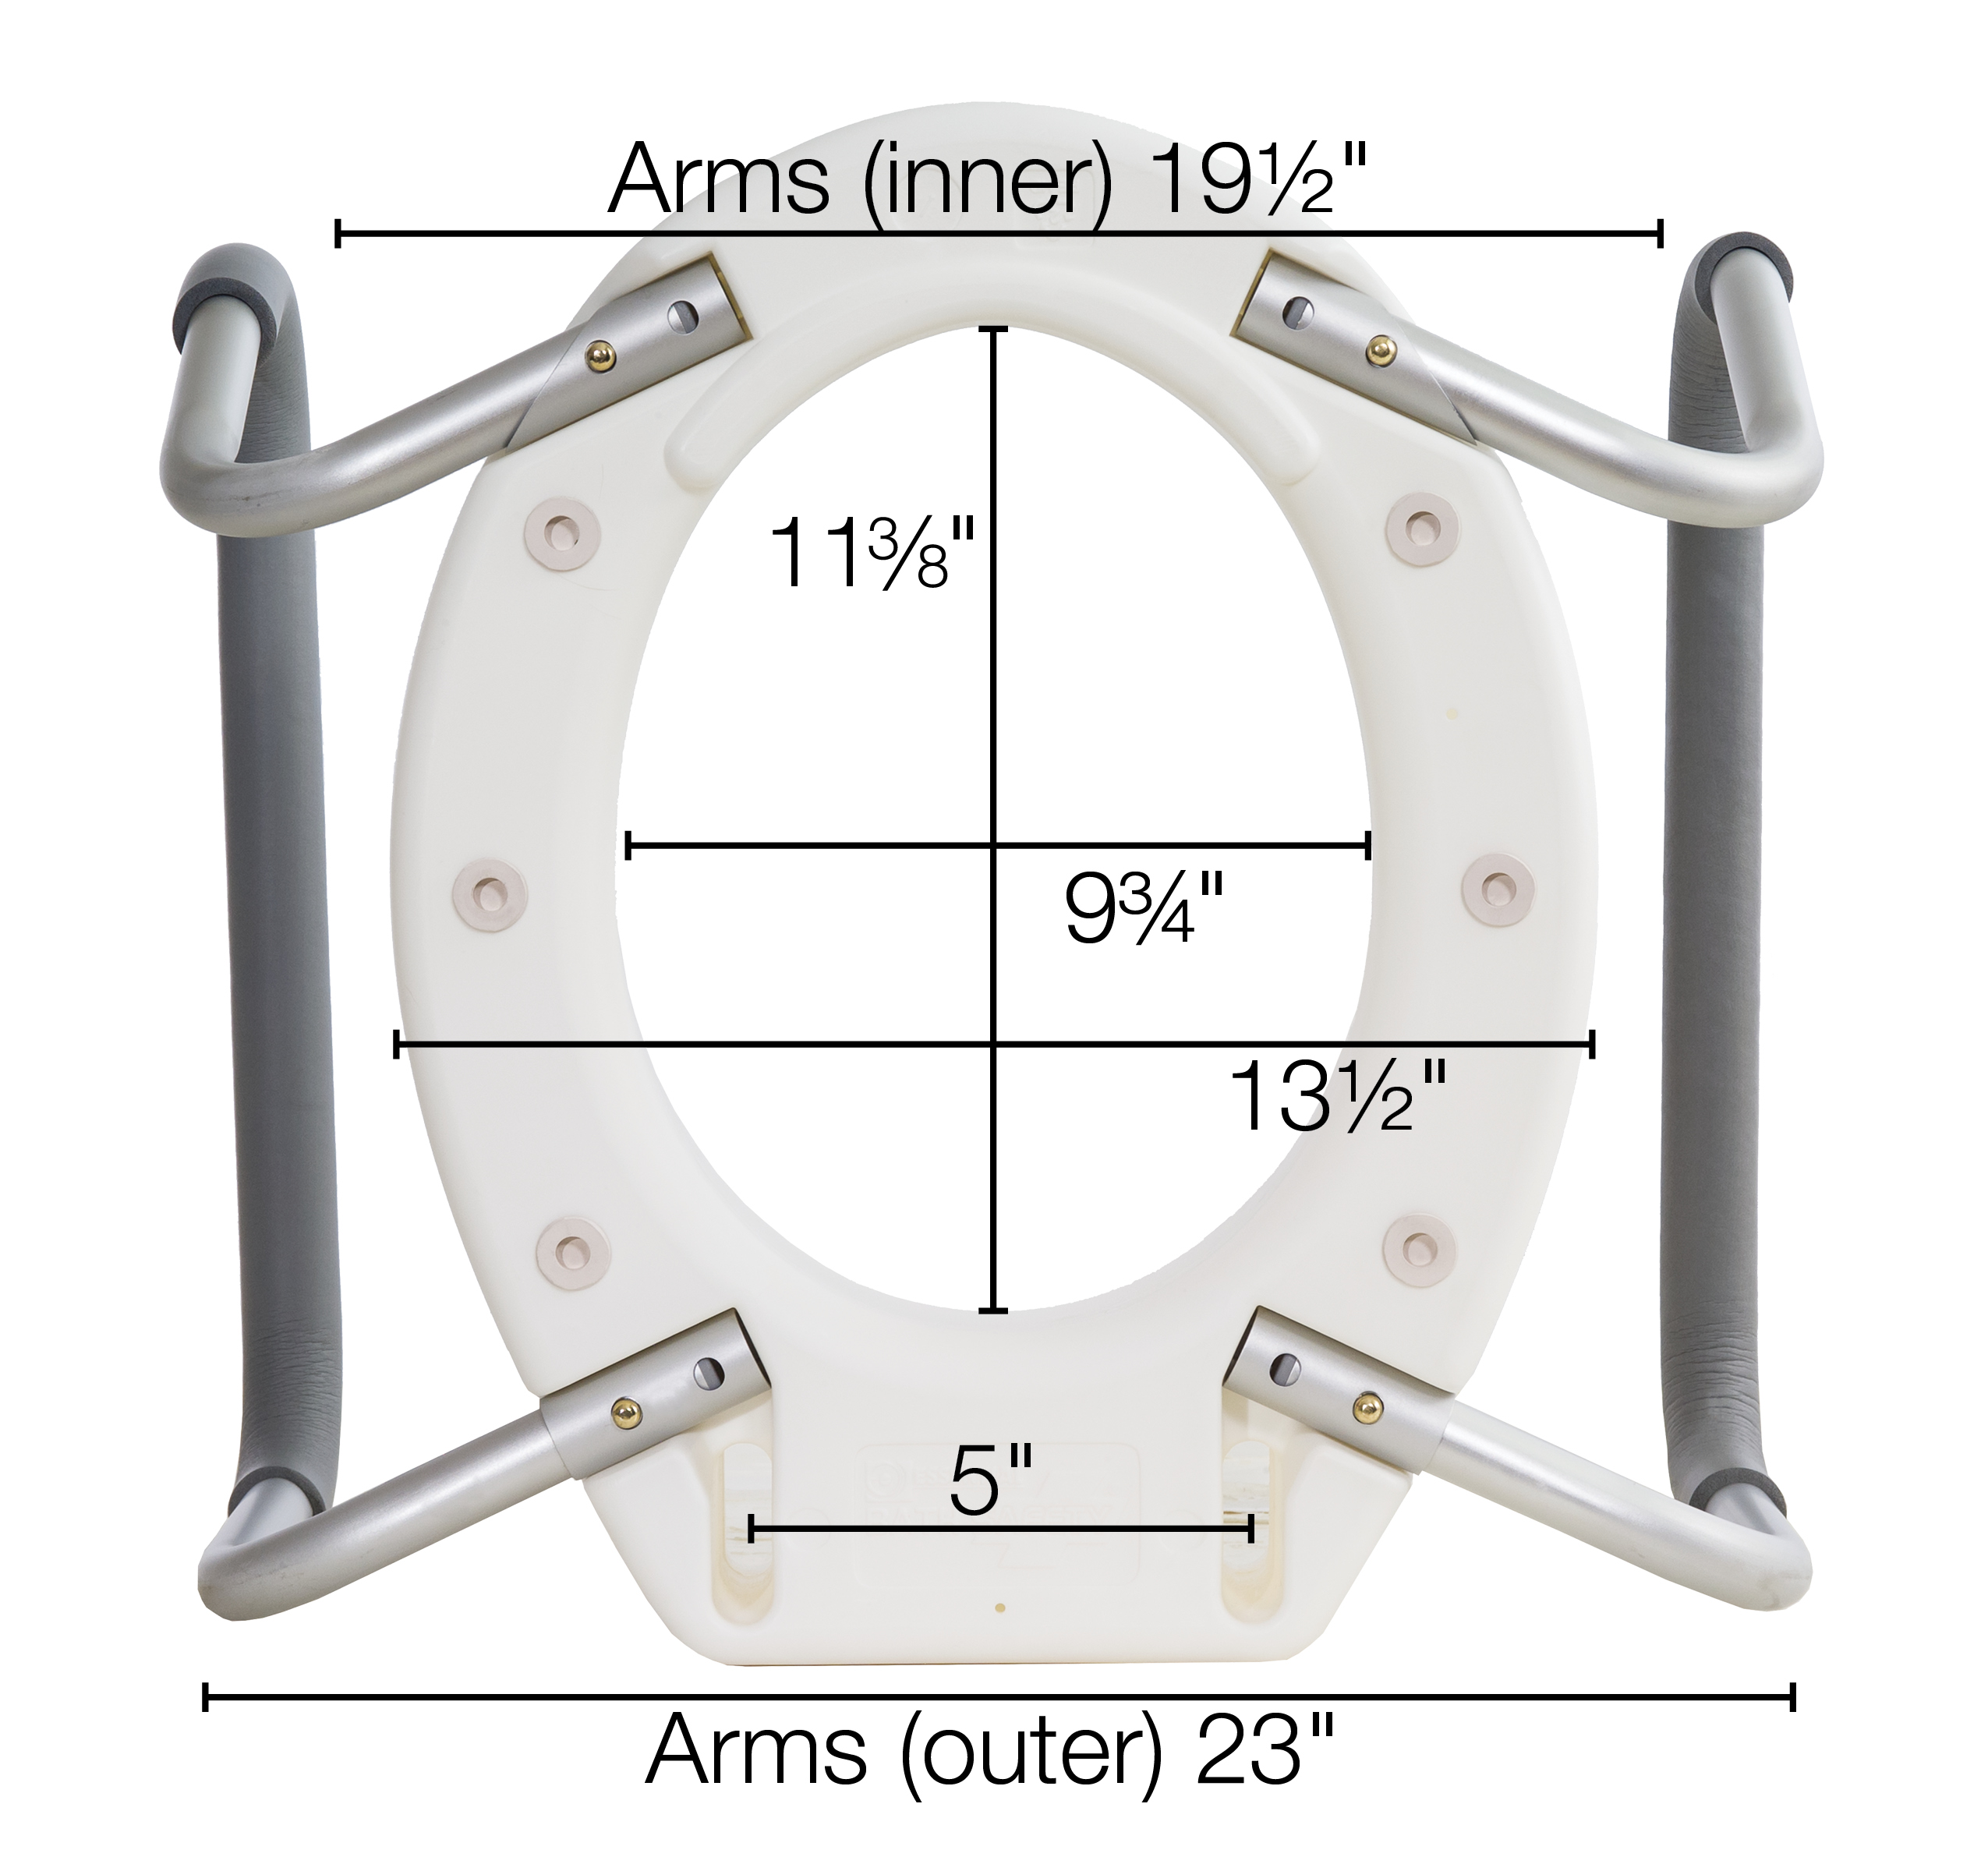 Essential Medical Supply Raised Elevated Toilet Seat Riser for a Standard Round Bowl with Padded Aluminum Arms for Support and Compatible with Existing Seat - image 5 of 8